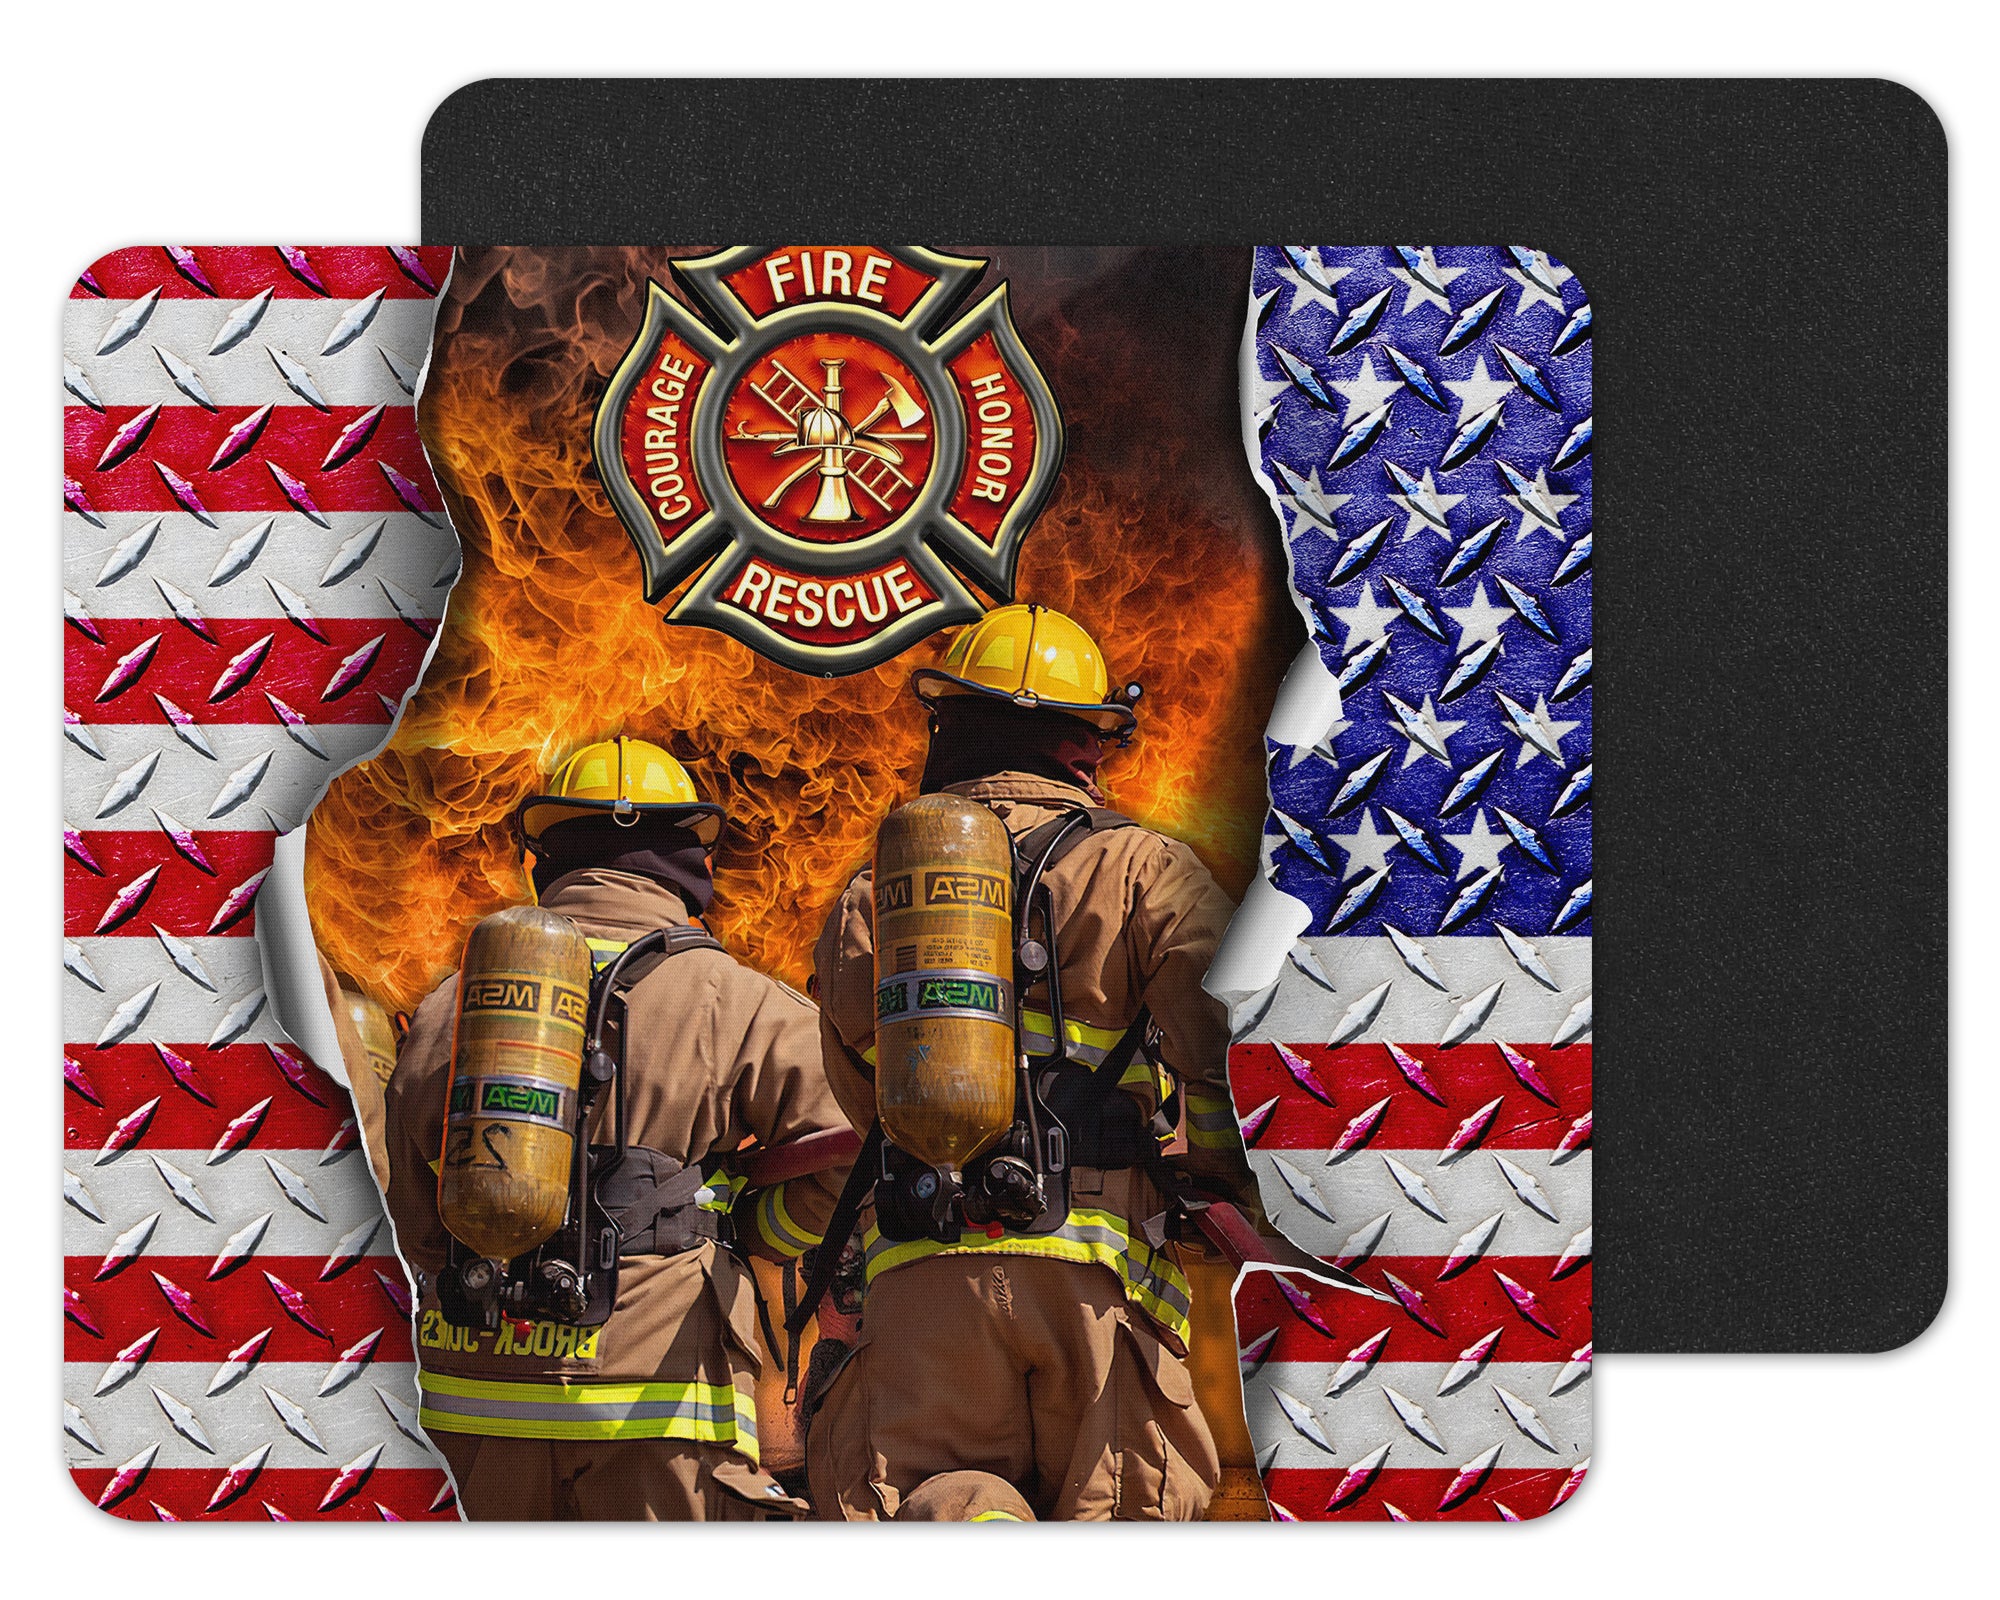 PATCH PATENT FIRE Rescue Military Round On Scratch Flag France First Aid  $17.09 - PicClick AU